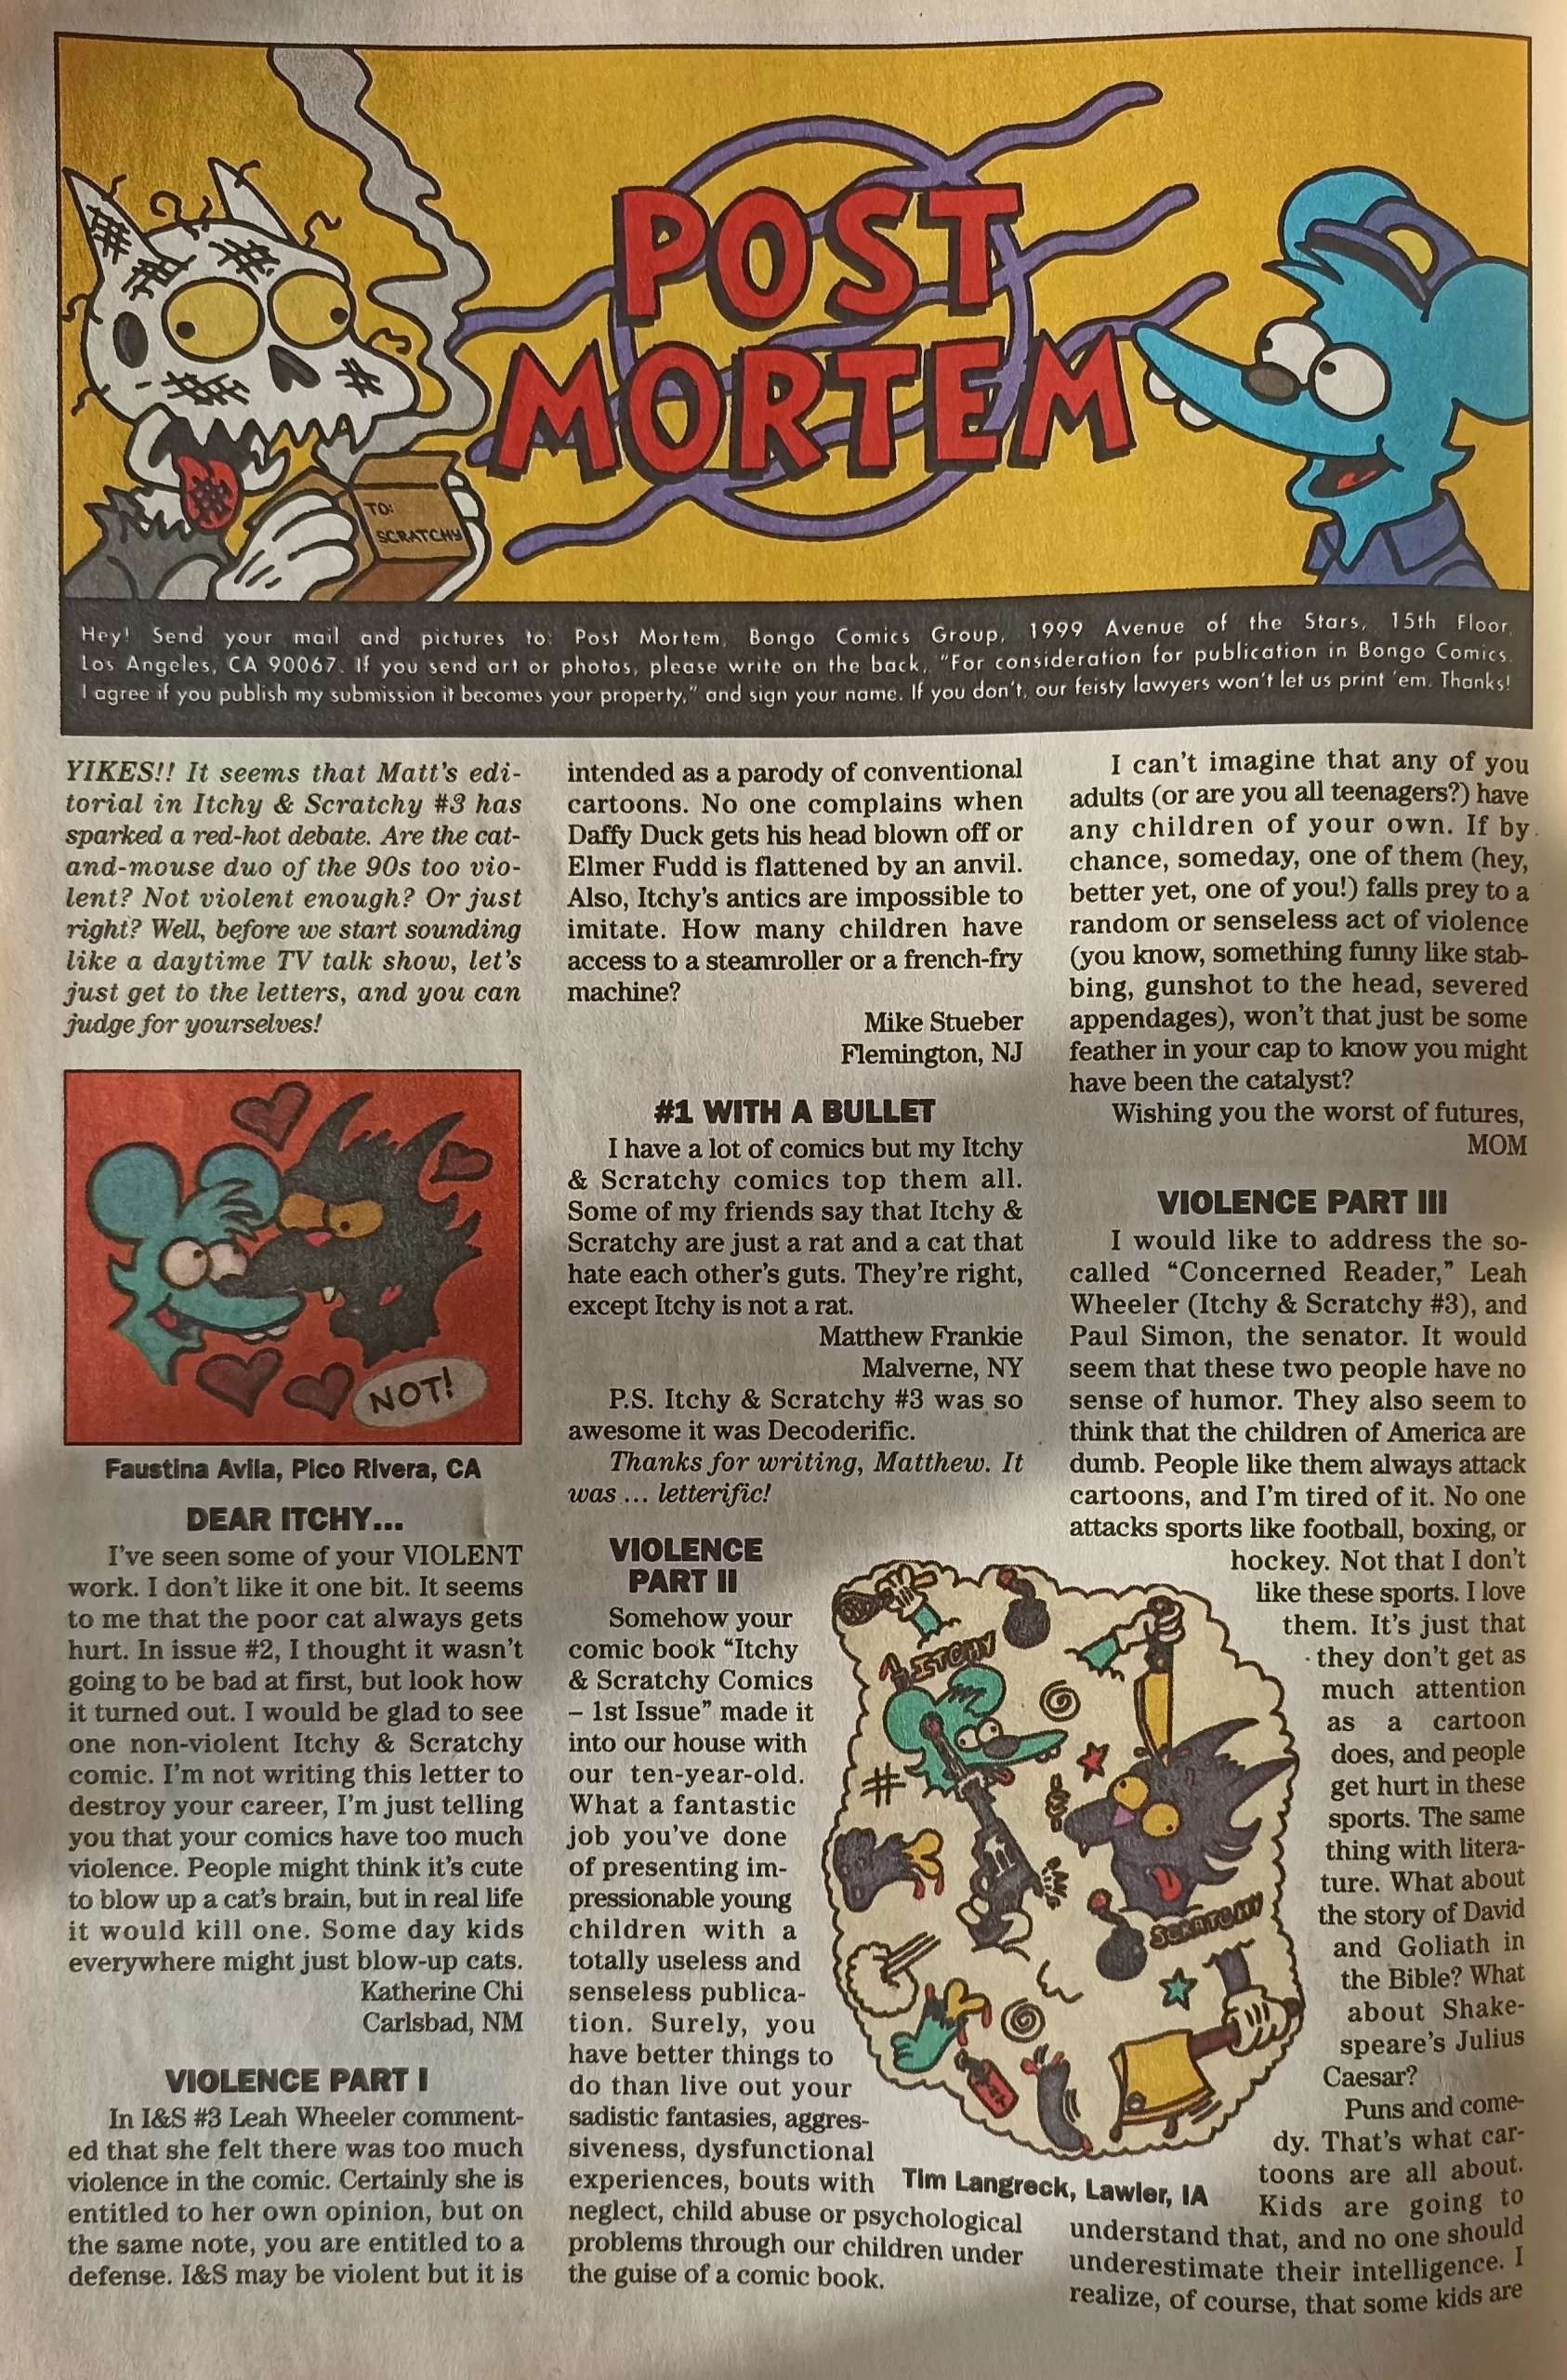 Itchy & Scratchy, letters from readers about violence in comics